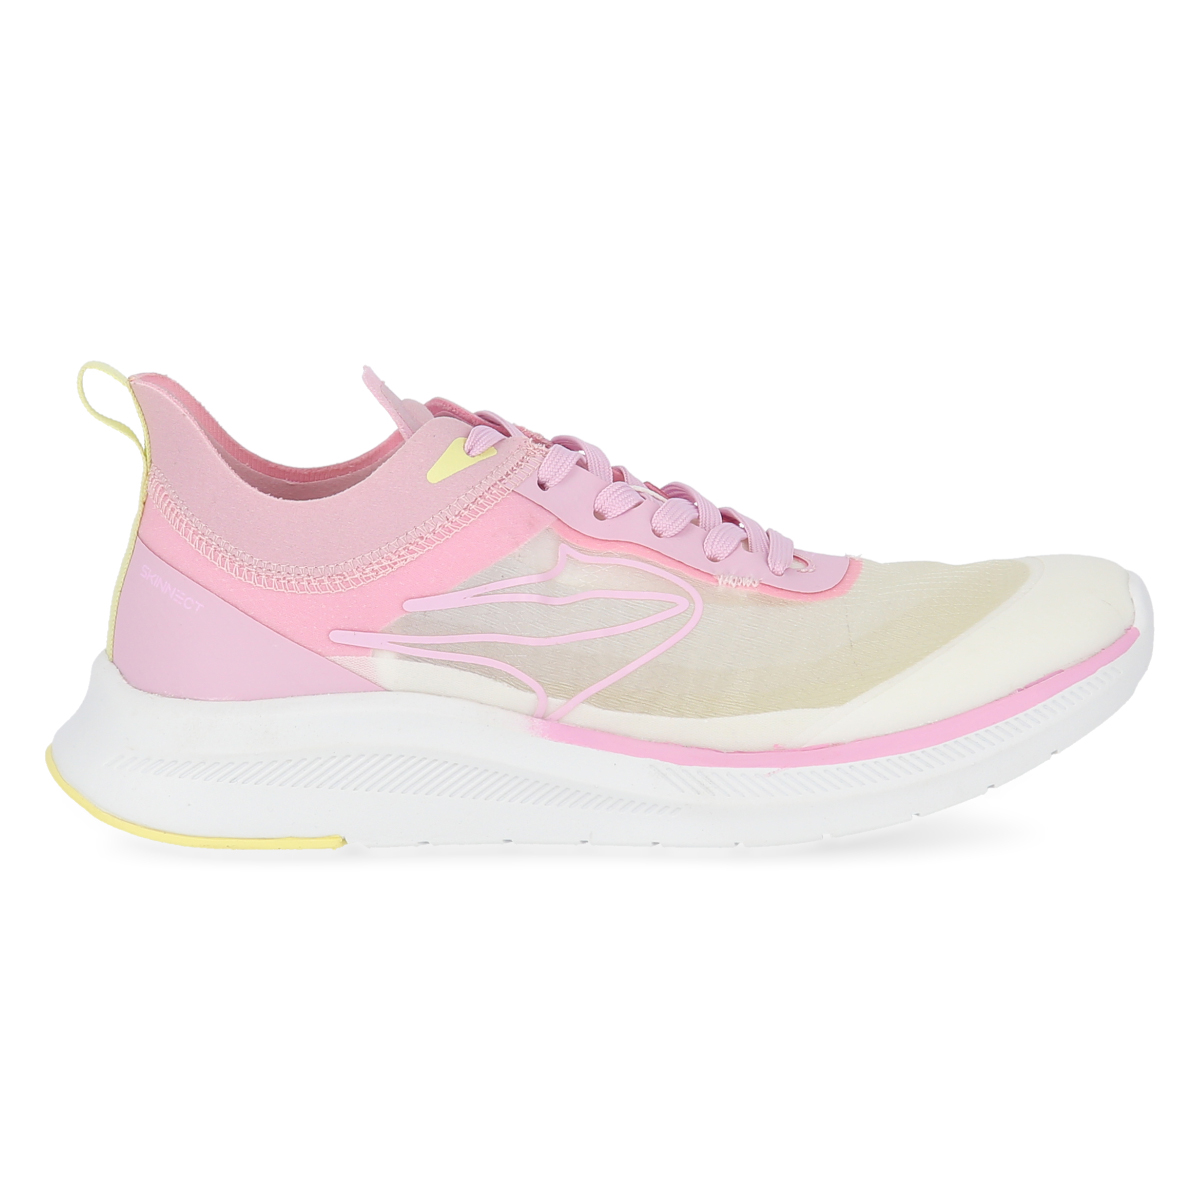 Zapatillas Running Topper Vr Pro Mujer,  image number null